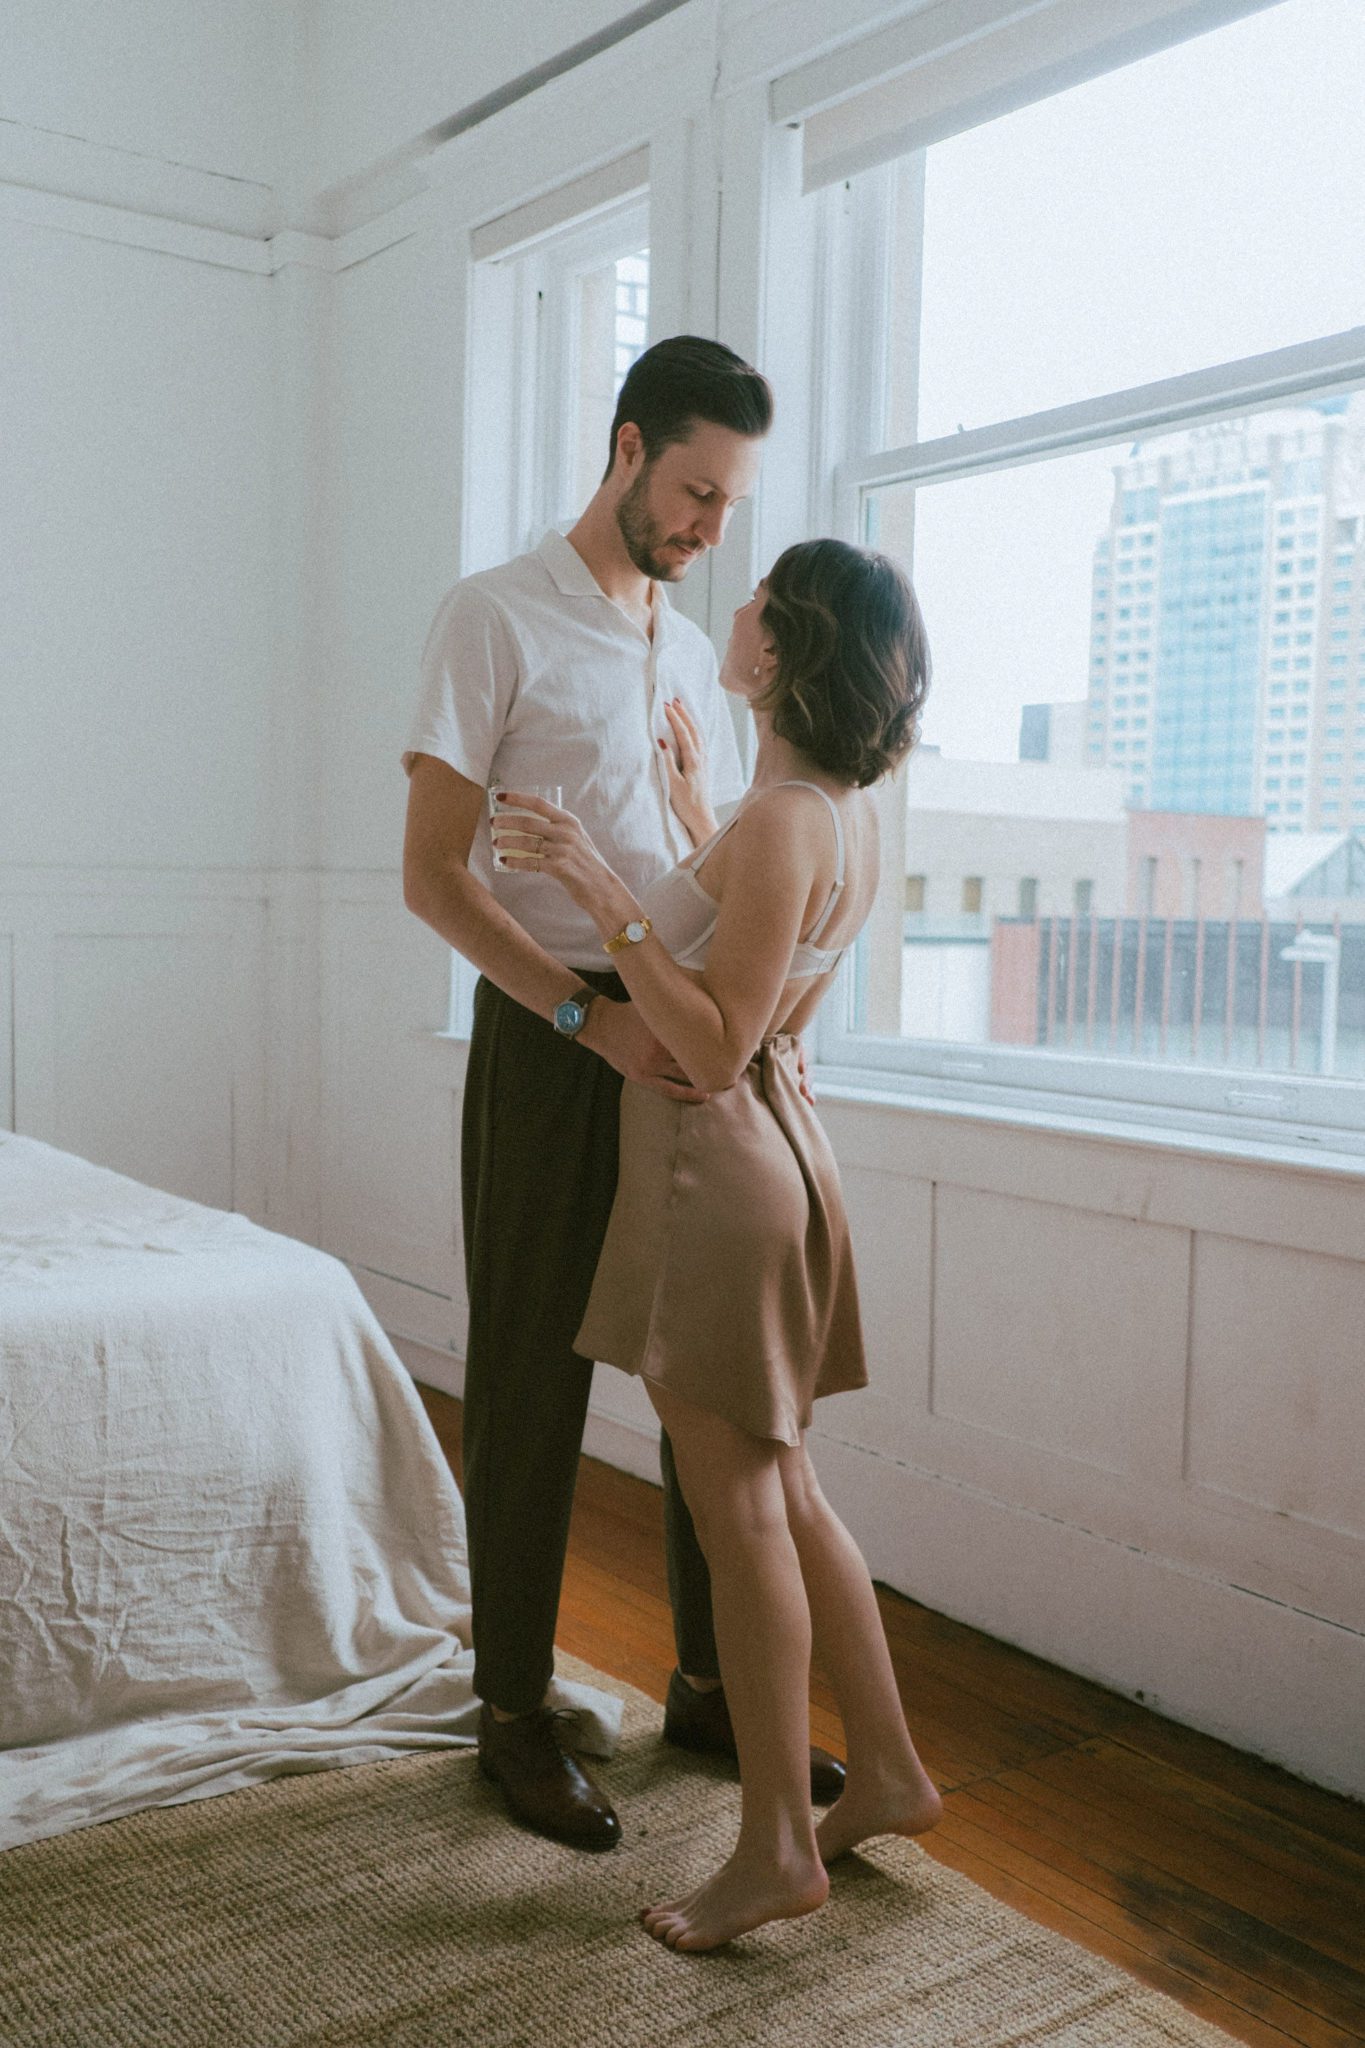 Retro romance and vintage vibes for this styled couple shoot.